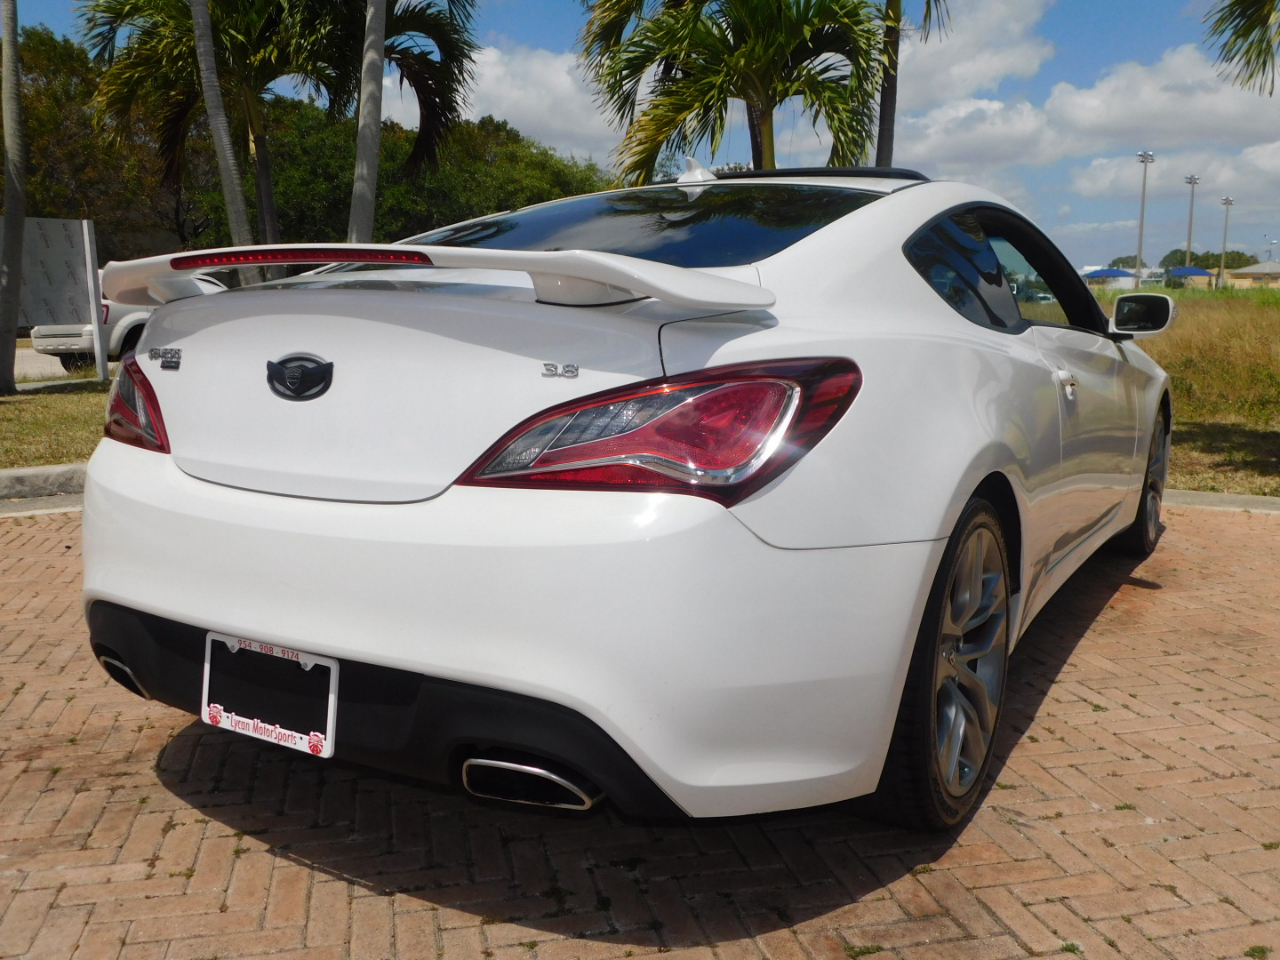 Used 2013 Hyundai Genesis Coupe 3.8 Track Manual for Sale